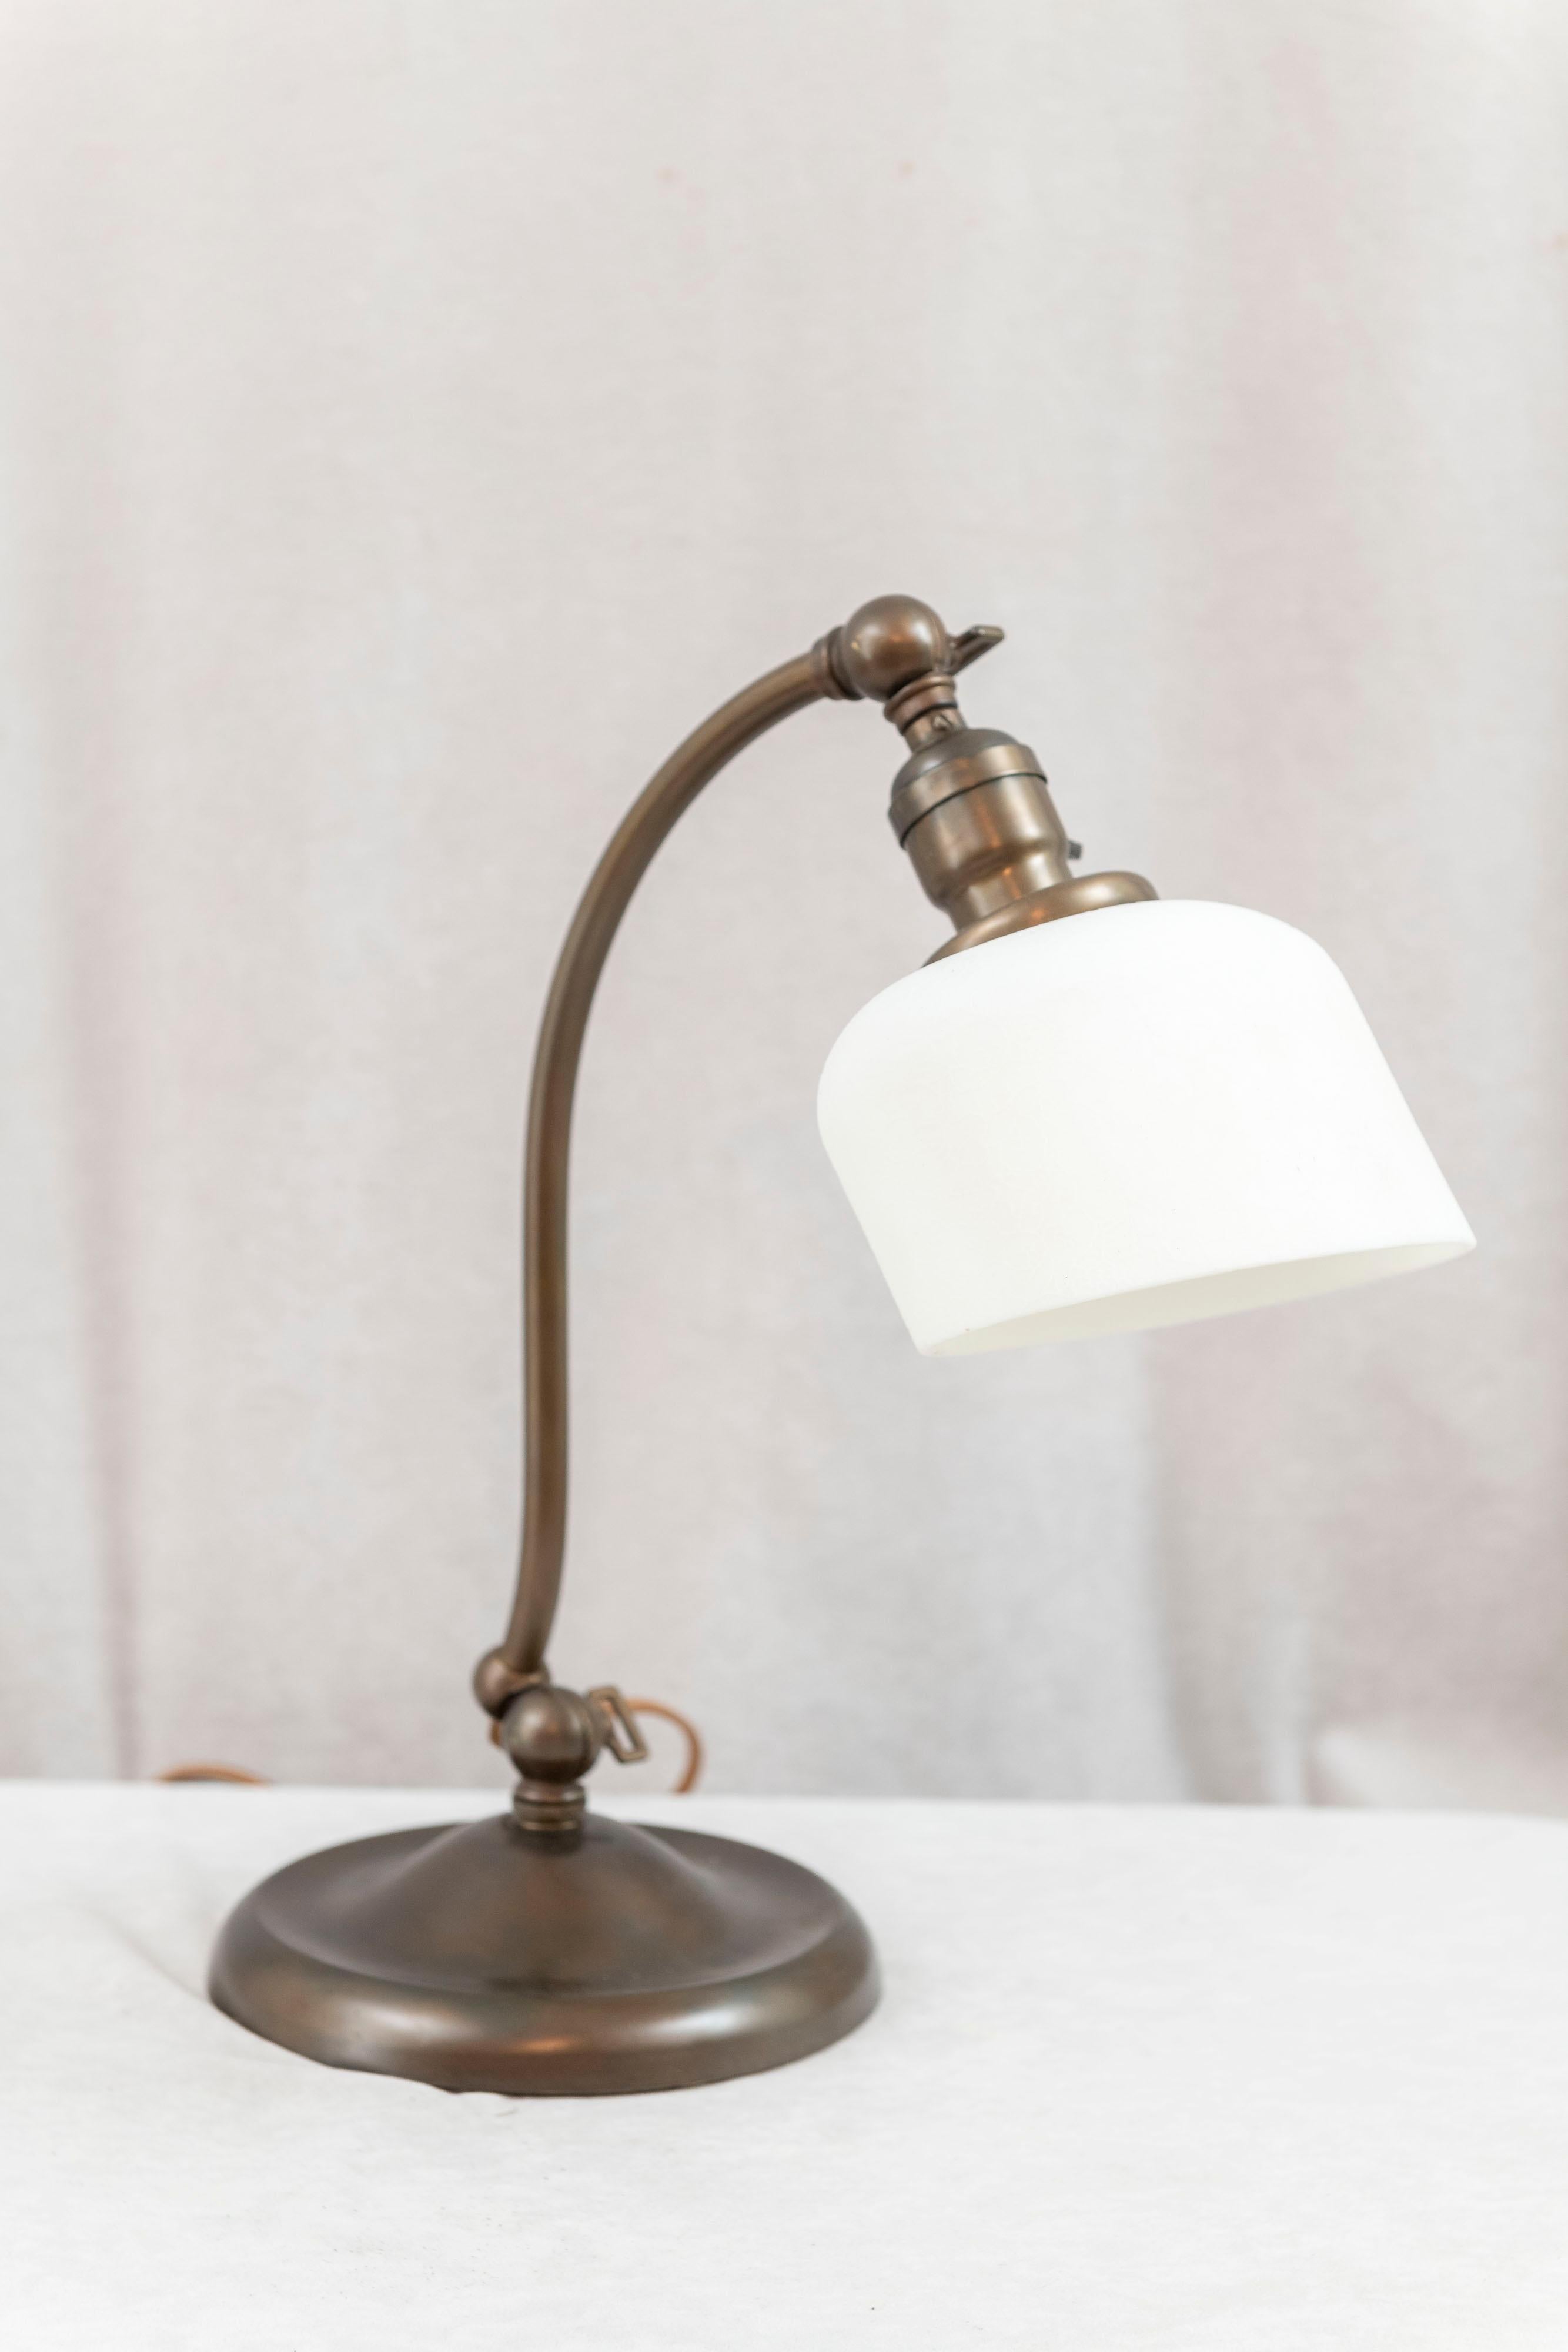  This lamp is both handsome and very practical. It has 2 knuckles up near the top and one near the bottom where you can easily adjust the height and width of the lamp. The brass base is weighted at the bottom and is very stabile. It is nicely